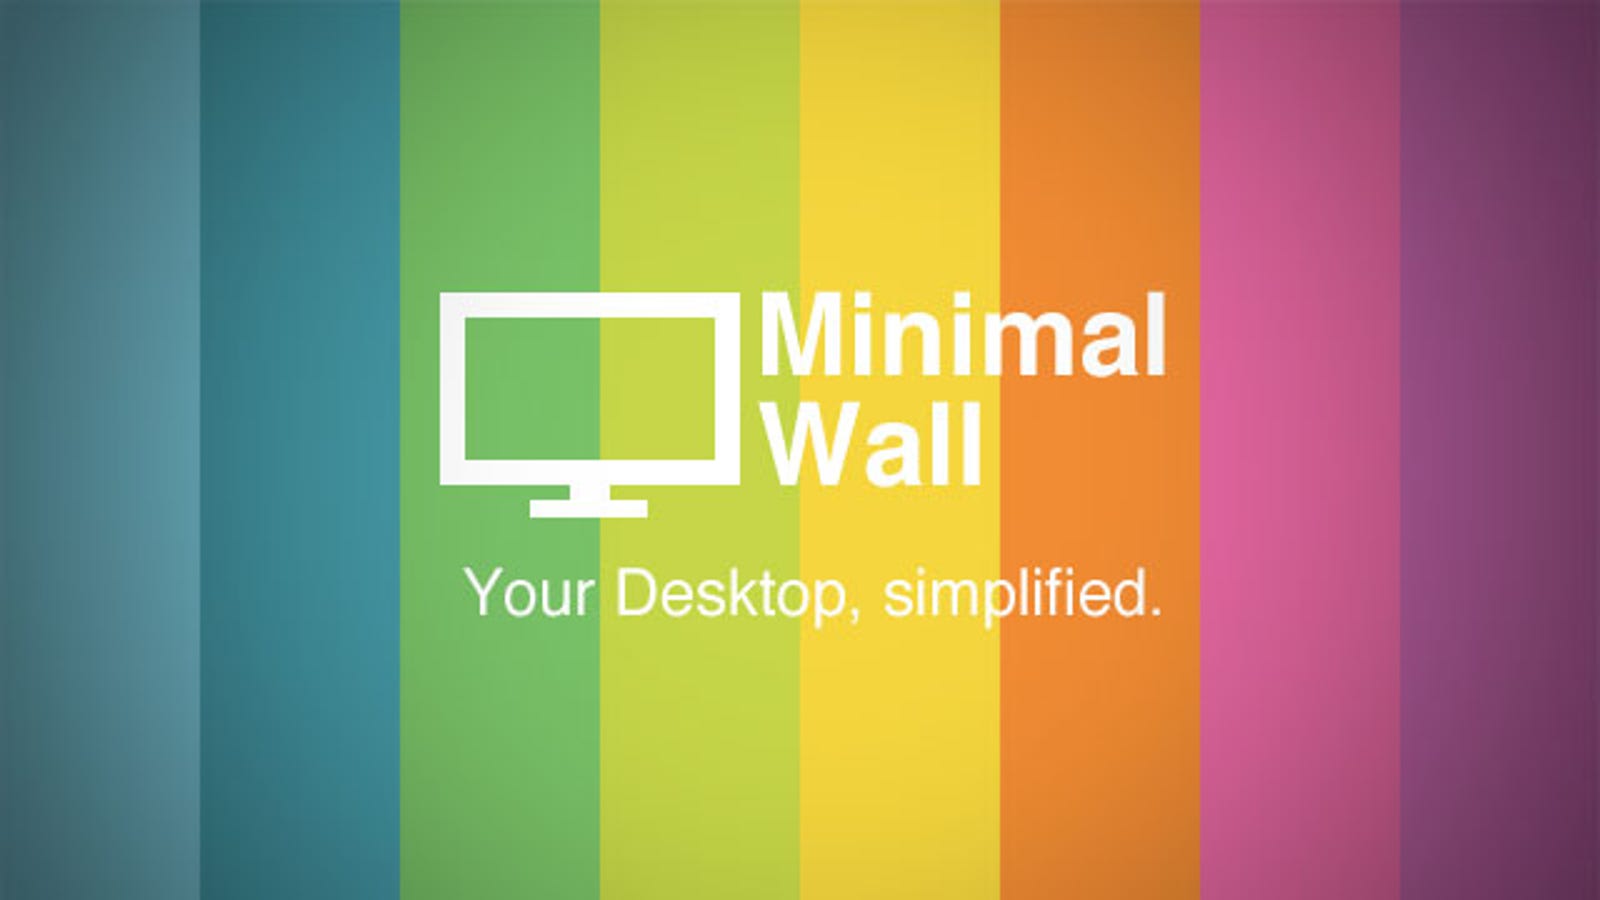 Minimal Wall Is A Collection of Simple (and Often Motivational) Wallpapers